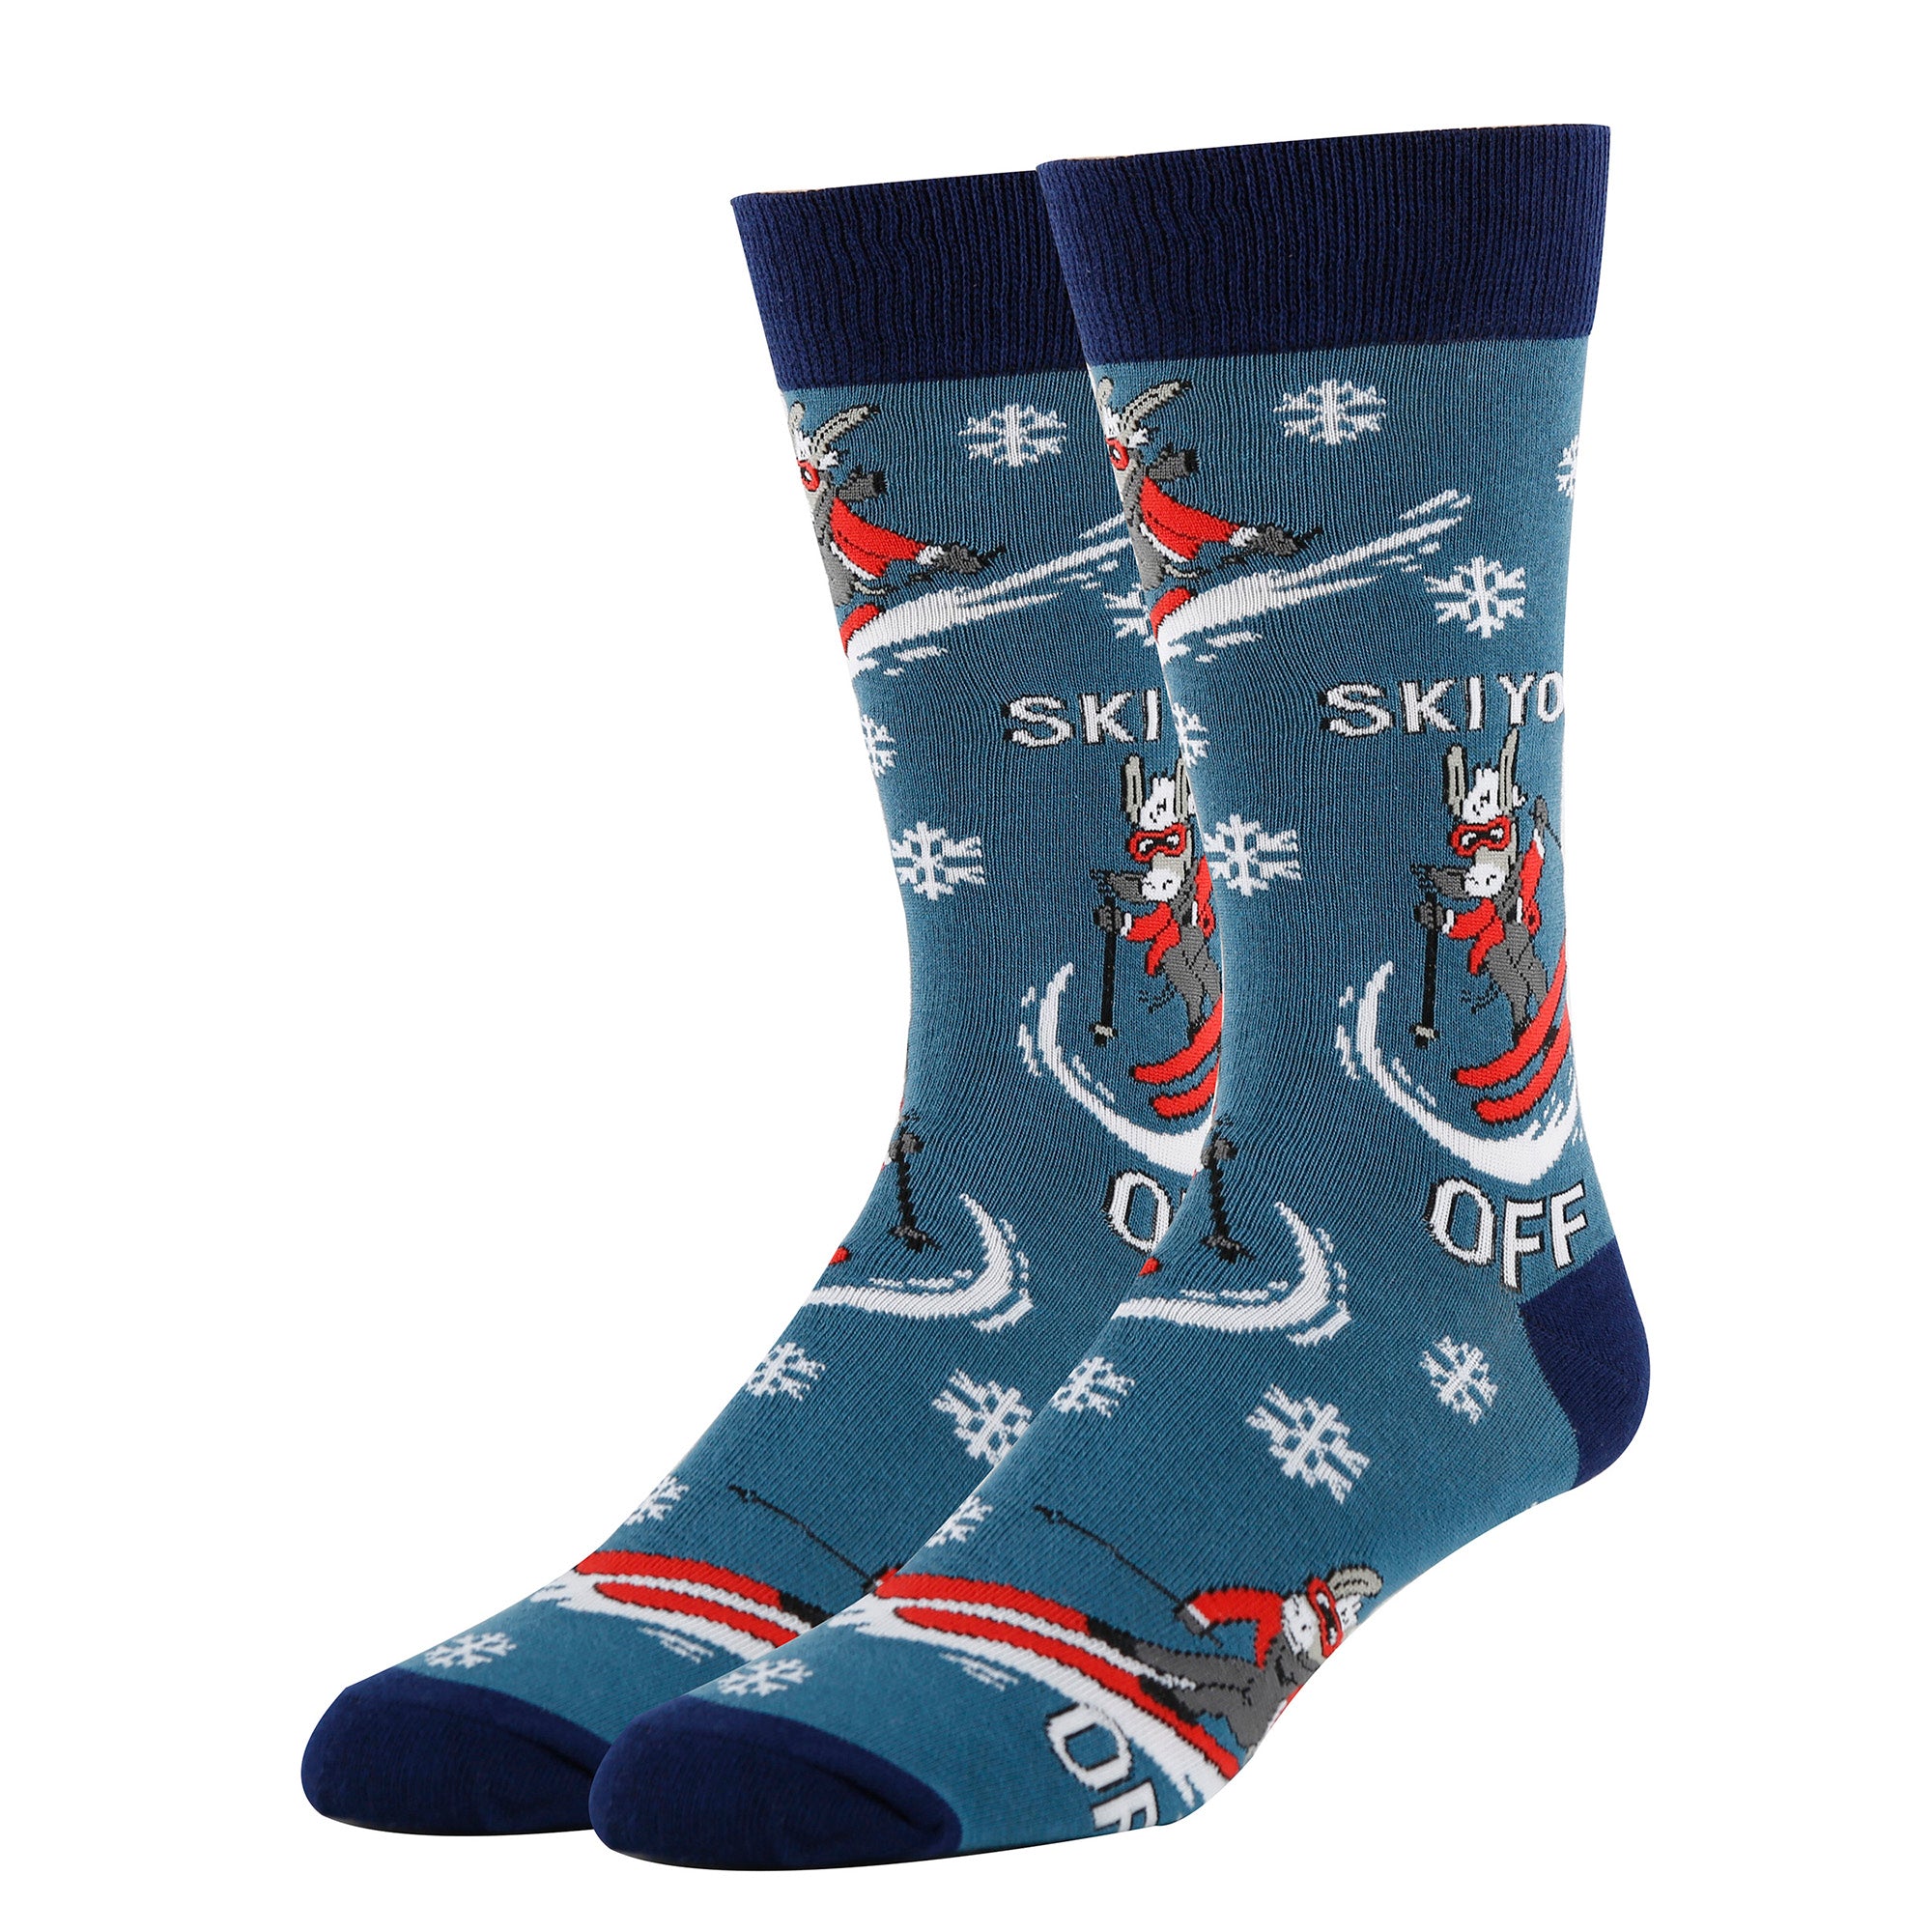 Funny Socks for Him, Custom Socks With Fun Sayings About Love